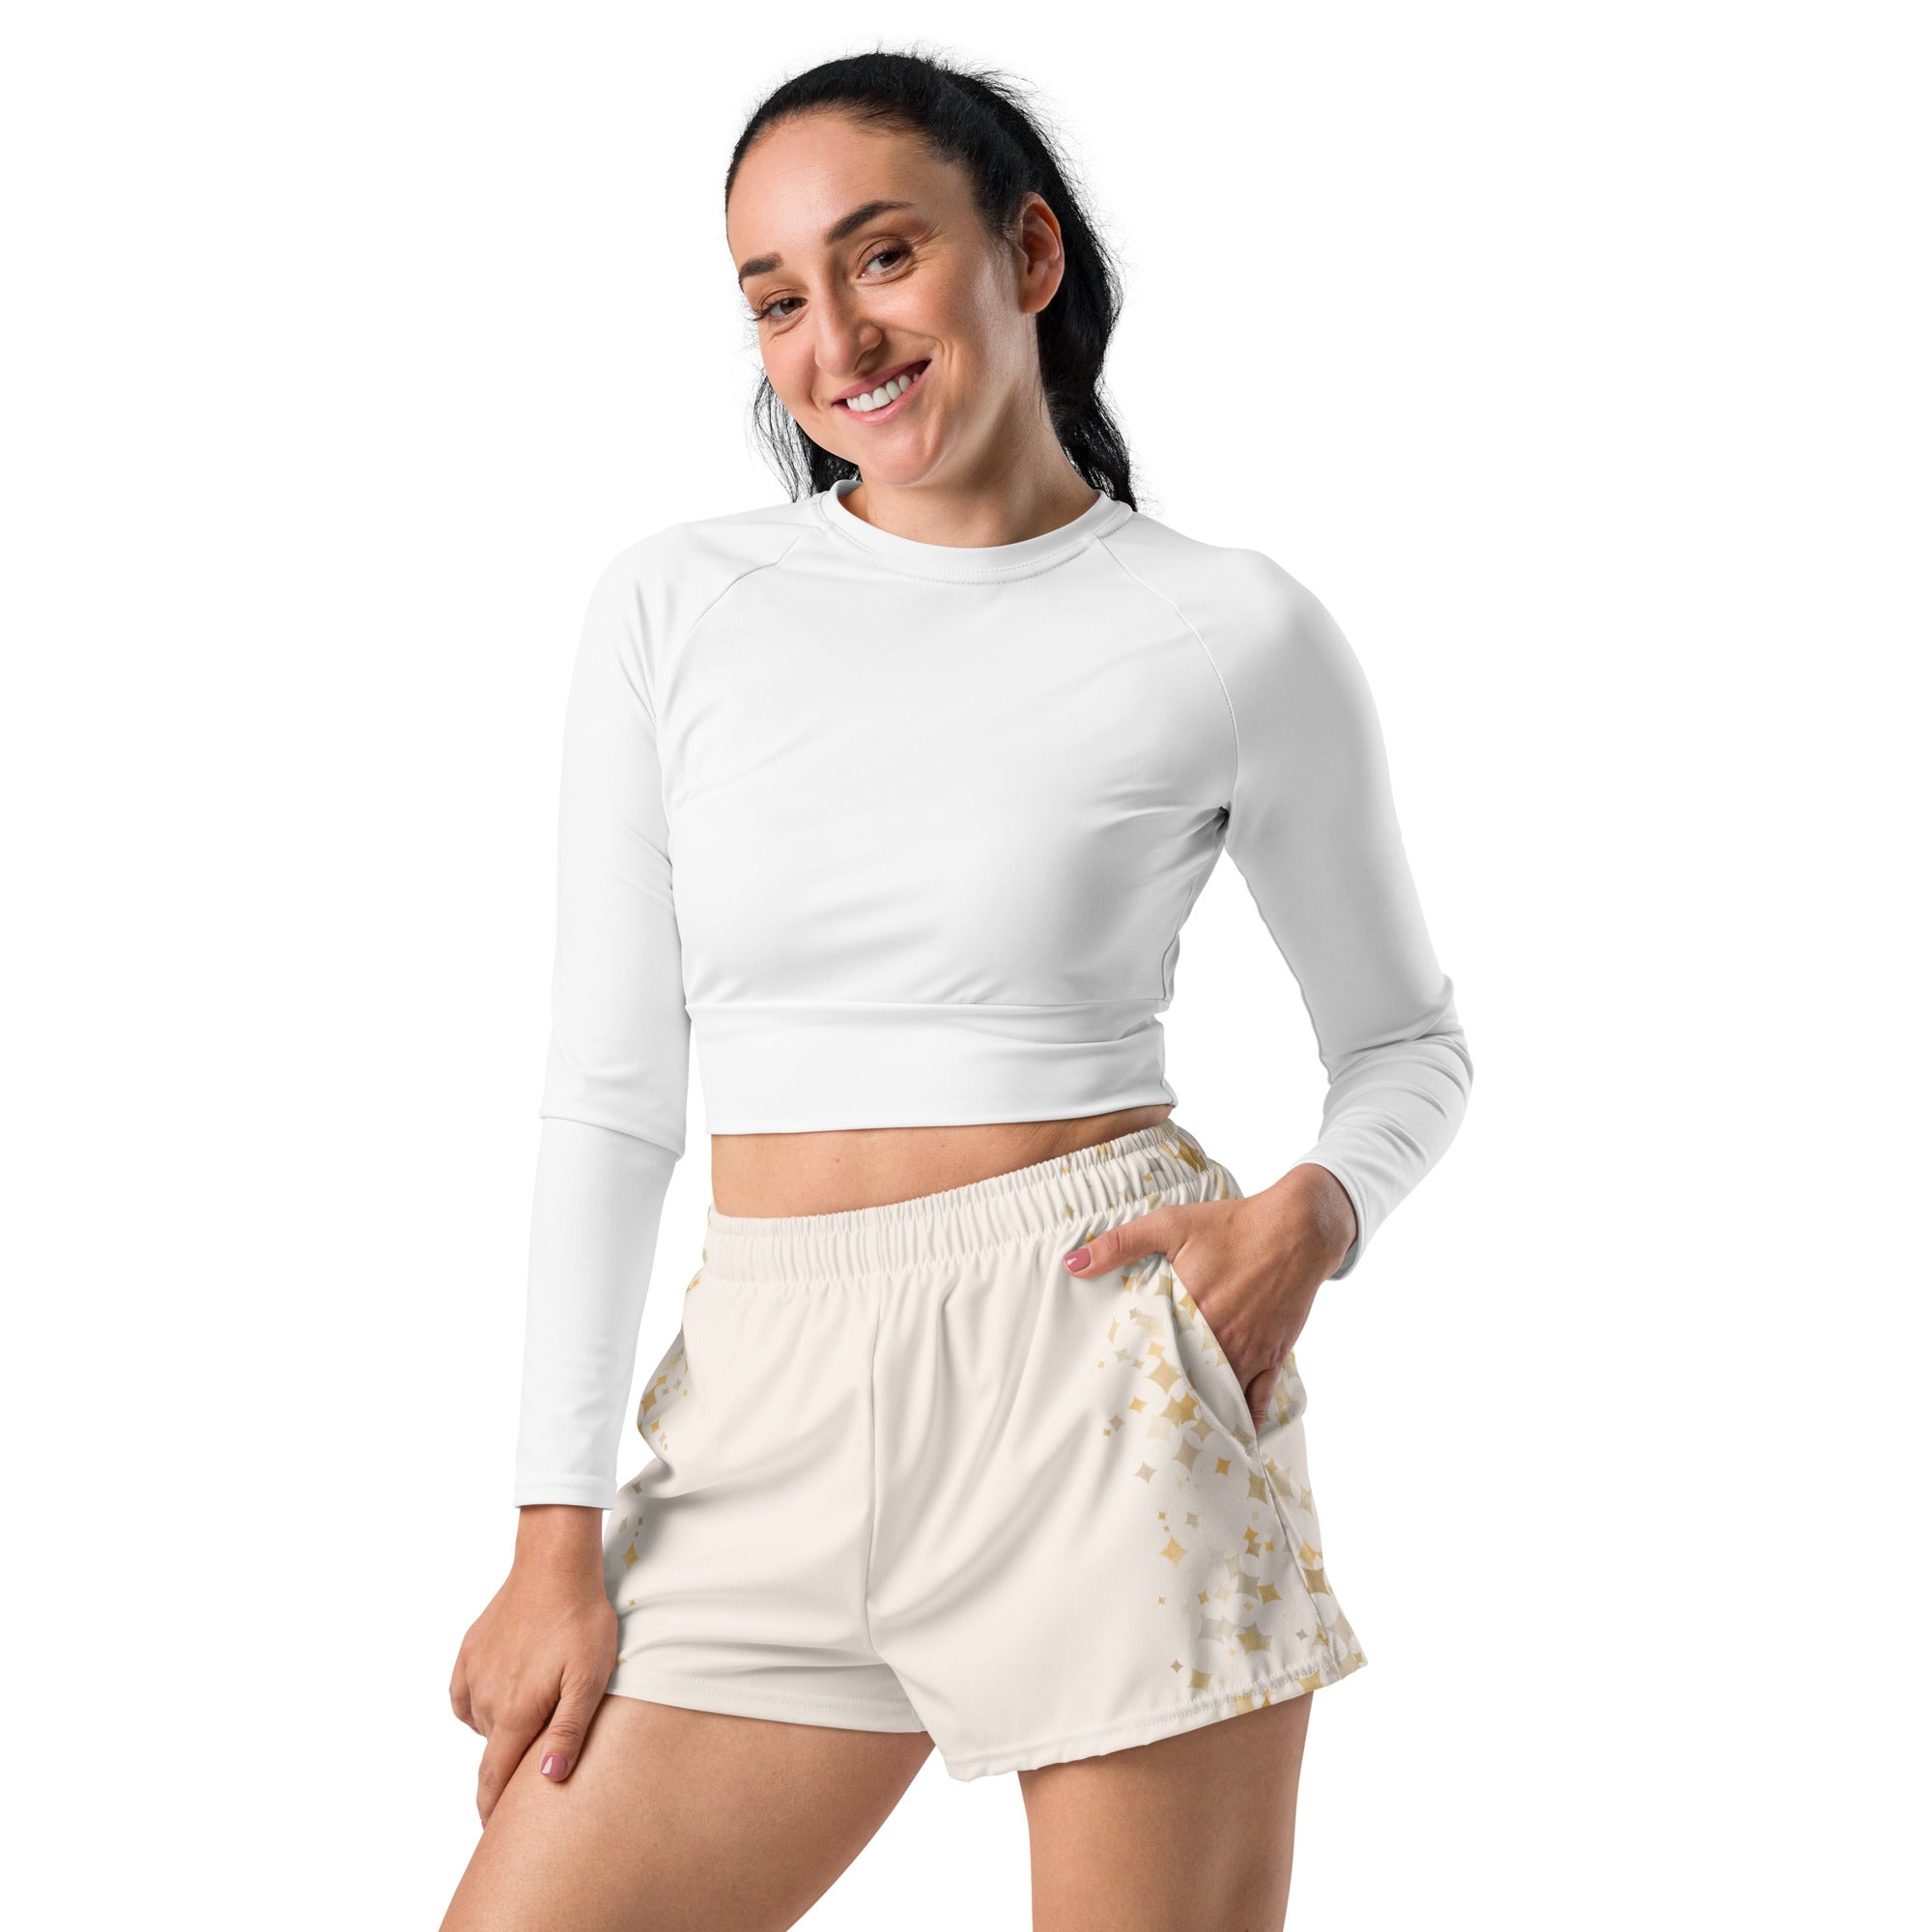 Fearless Women’s Recycled Athletic Shorts